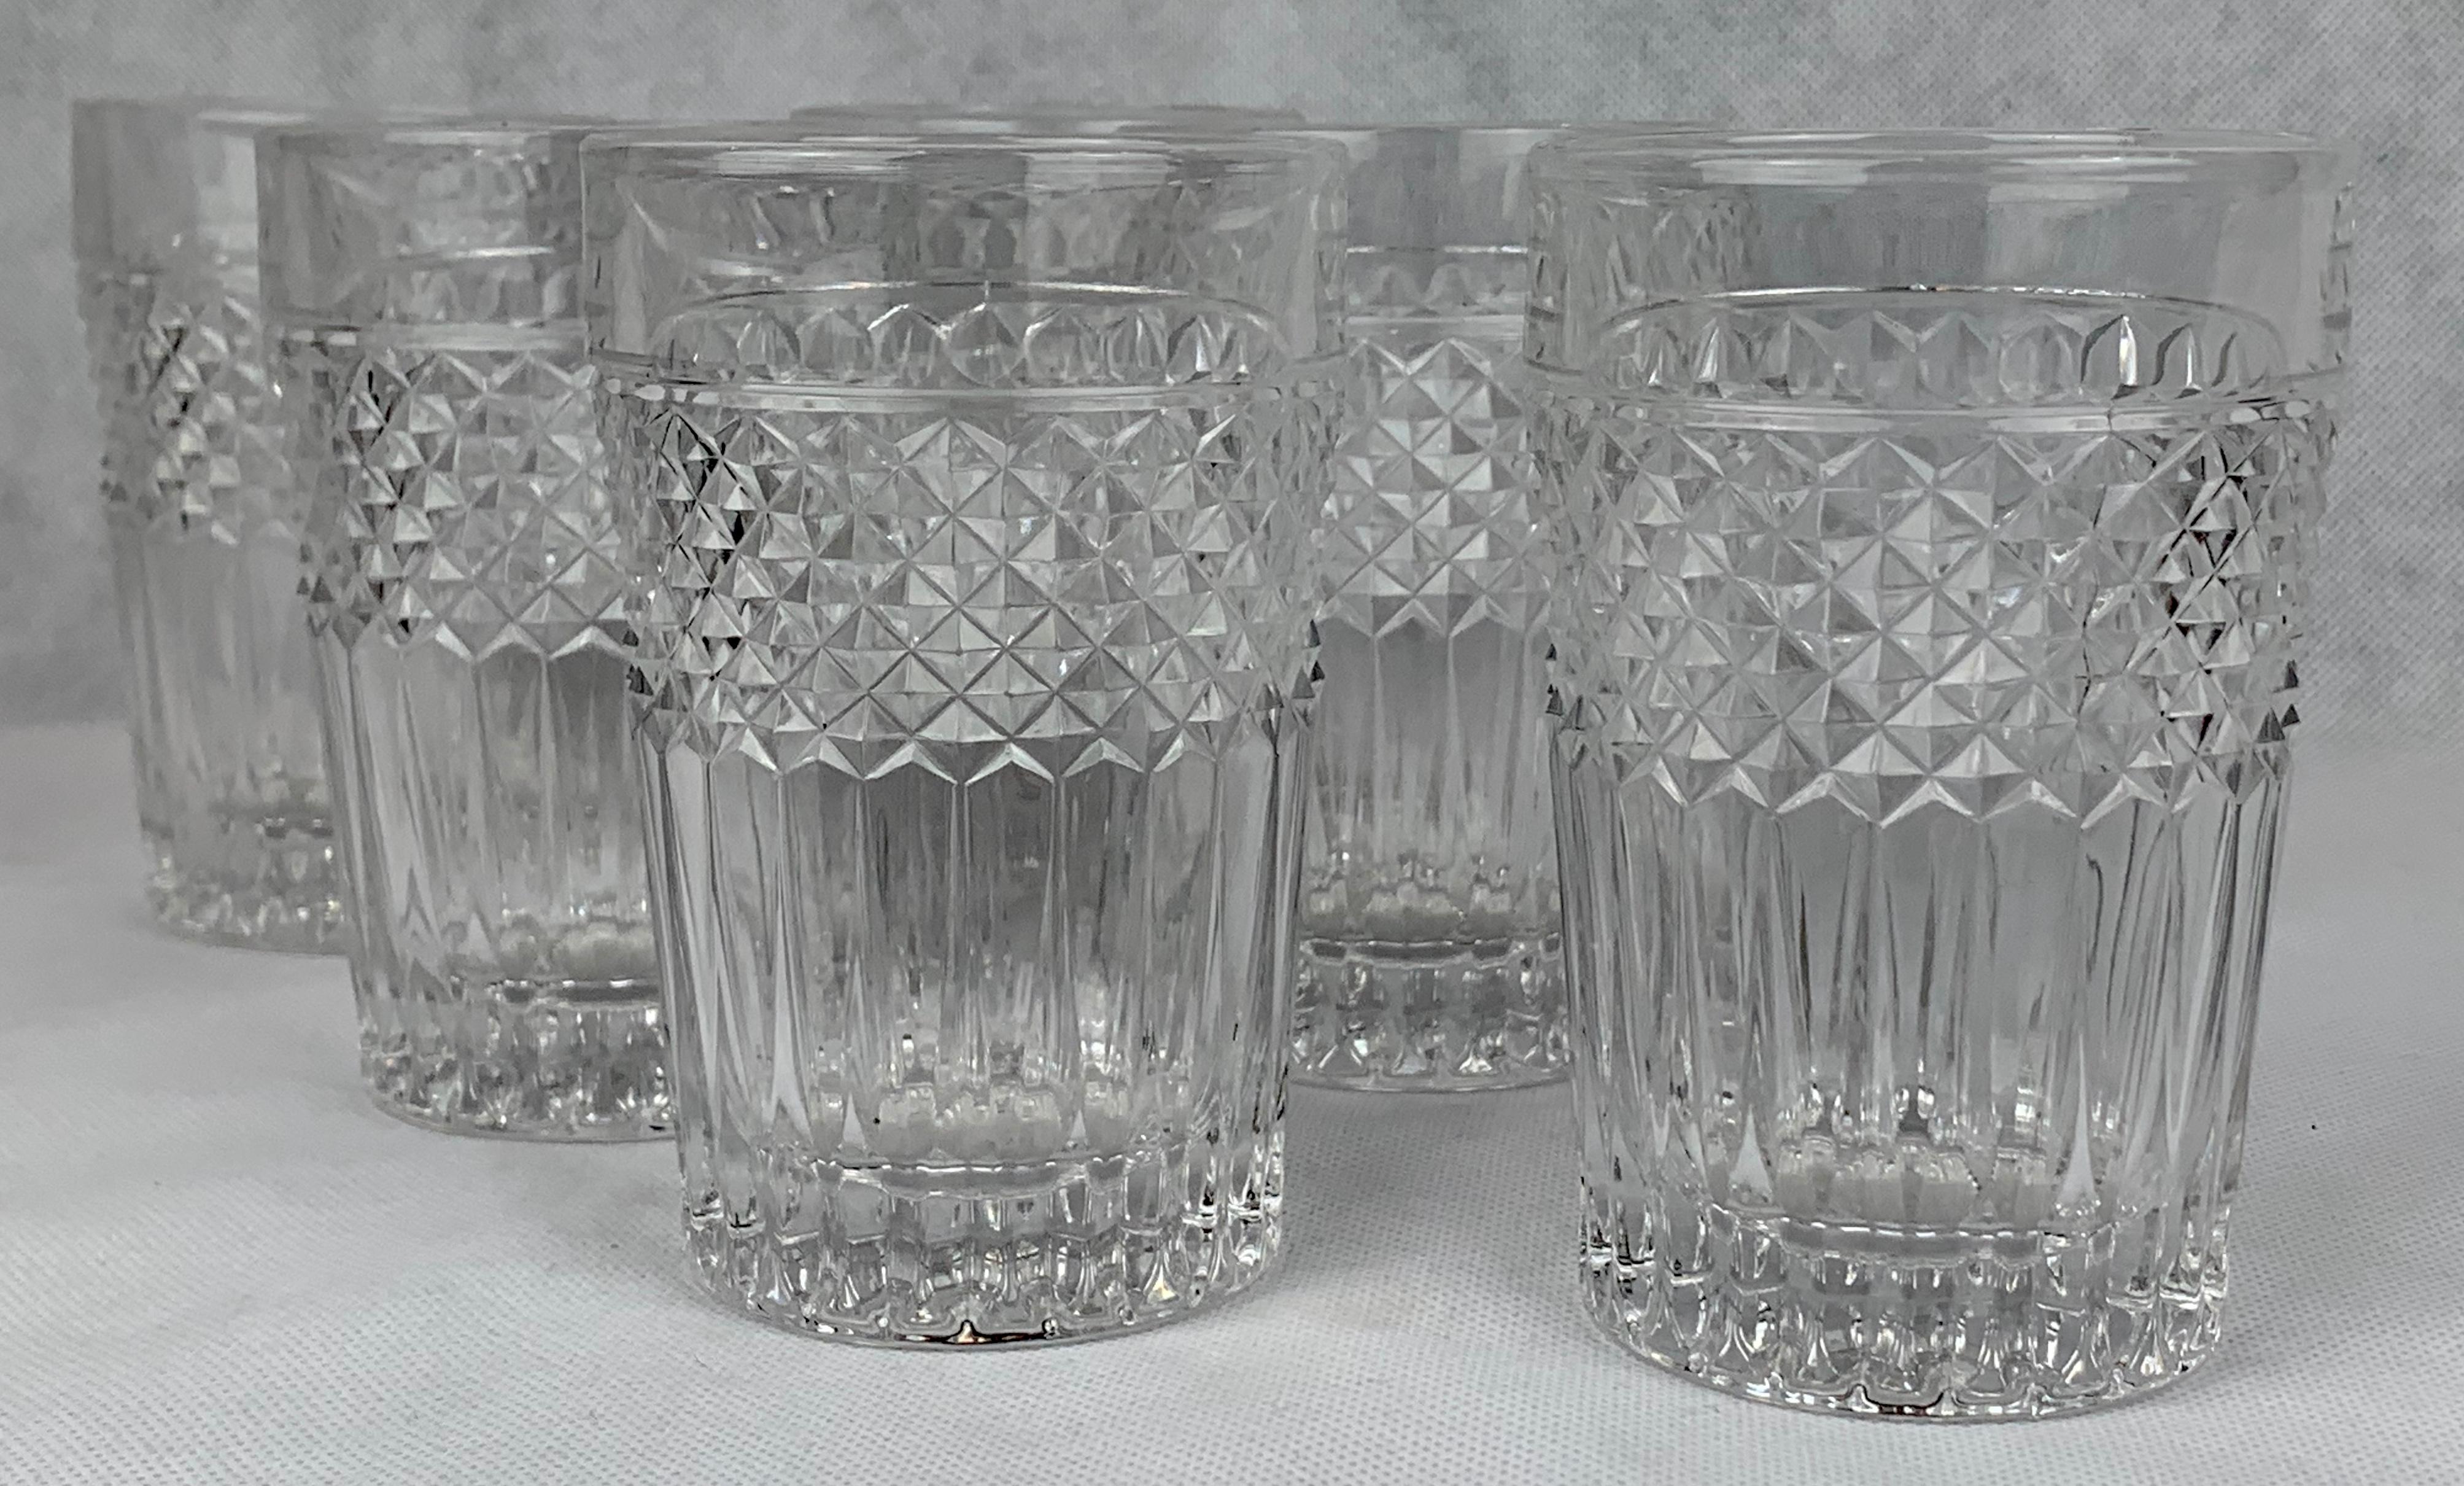 Set of 6 Val Saint Lambert cut crystal highball/tumblers pattern Vas11.  SCRIBE signed by hand on the bottom of each glass.  Pieces of VSL SCRIBE signed by hand are preferred by collectors over an acid etched mark.  These glasses are in mint